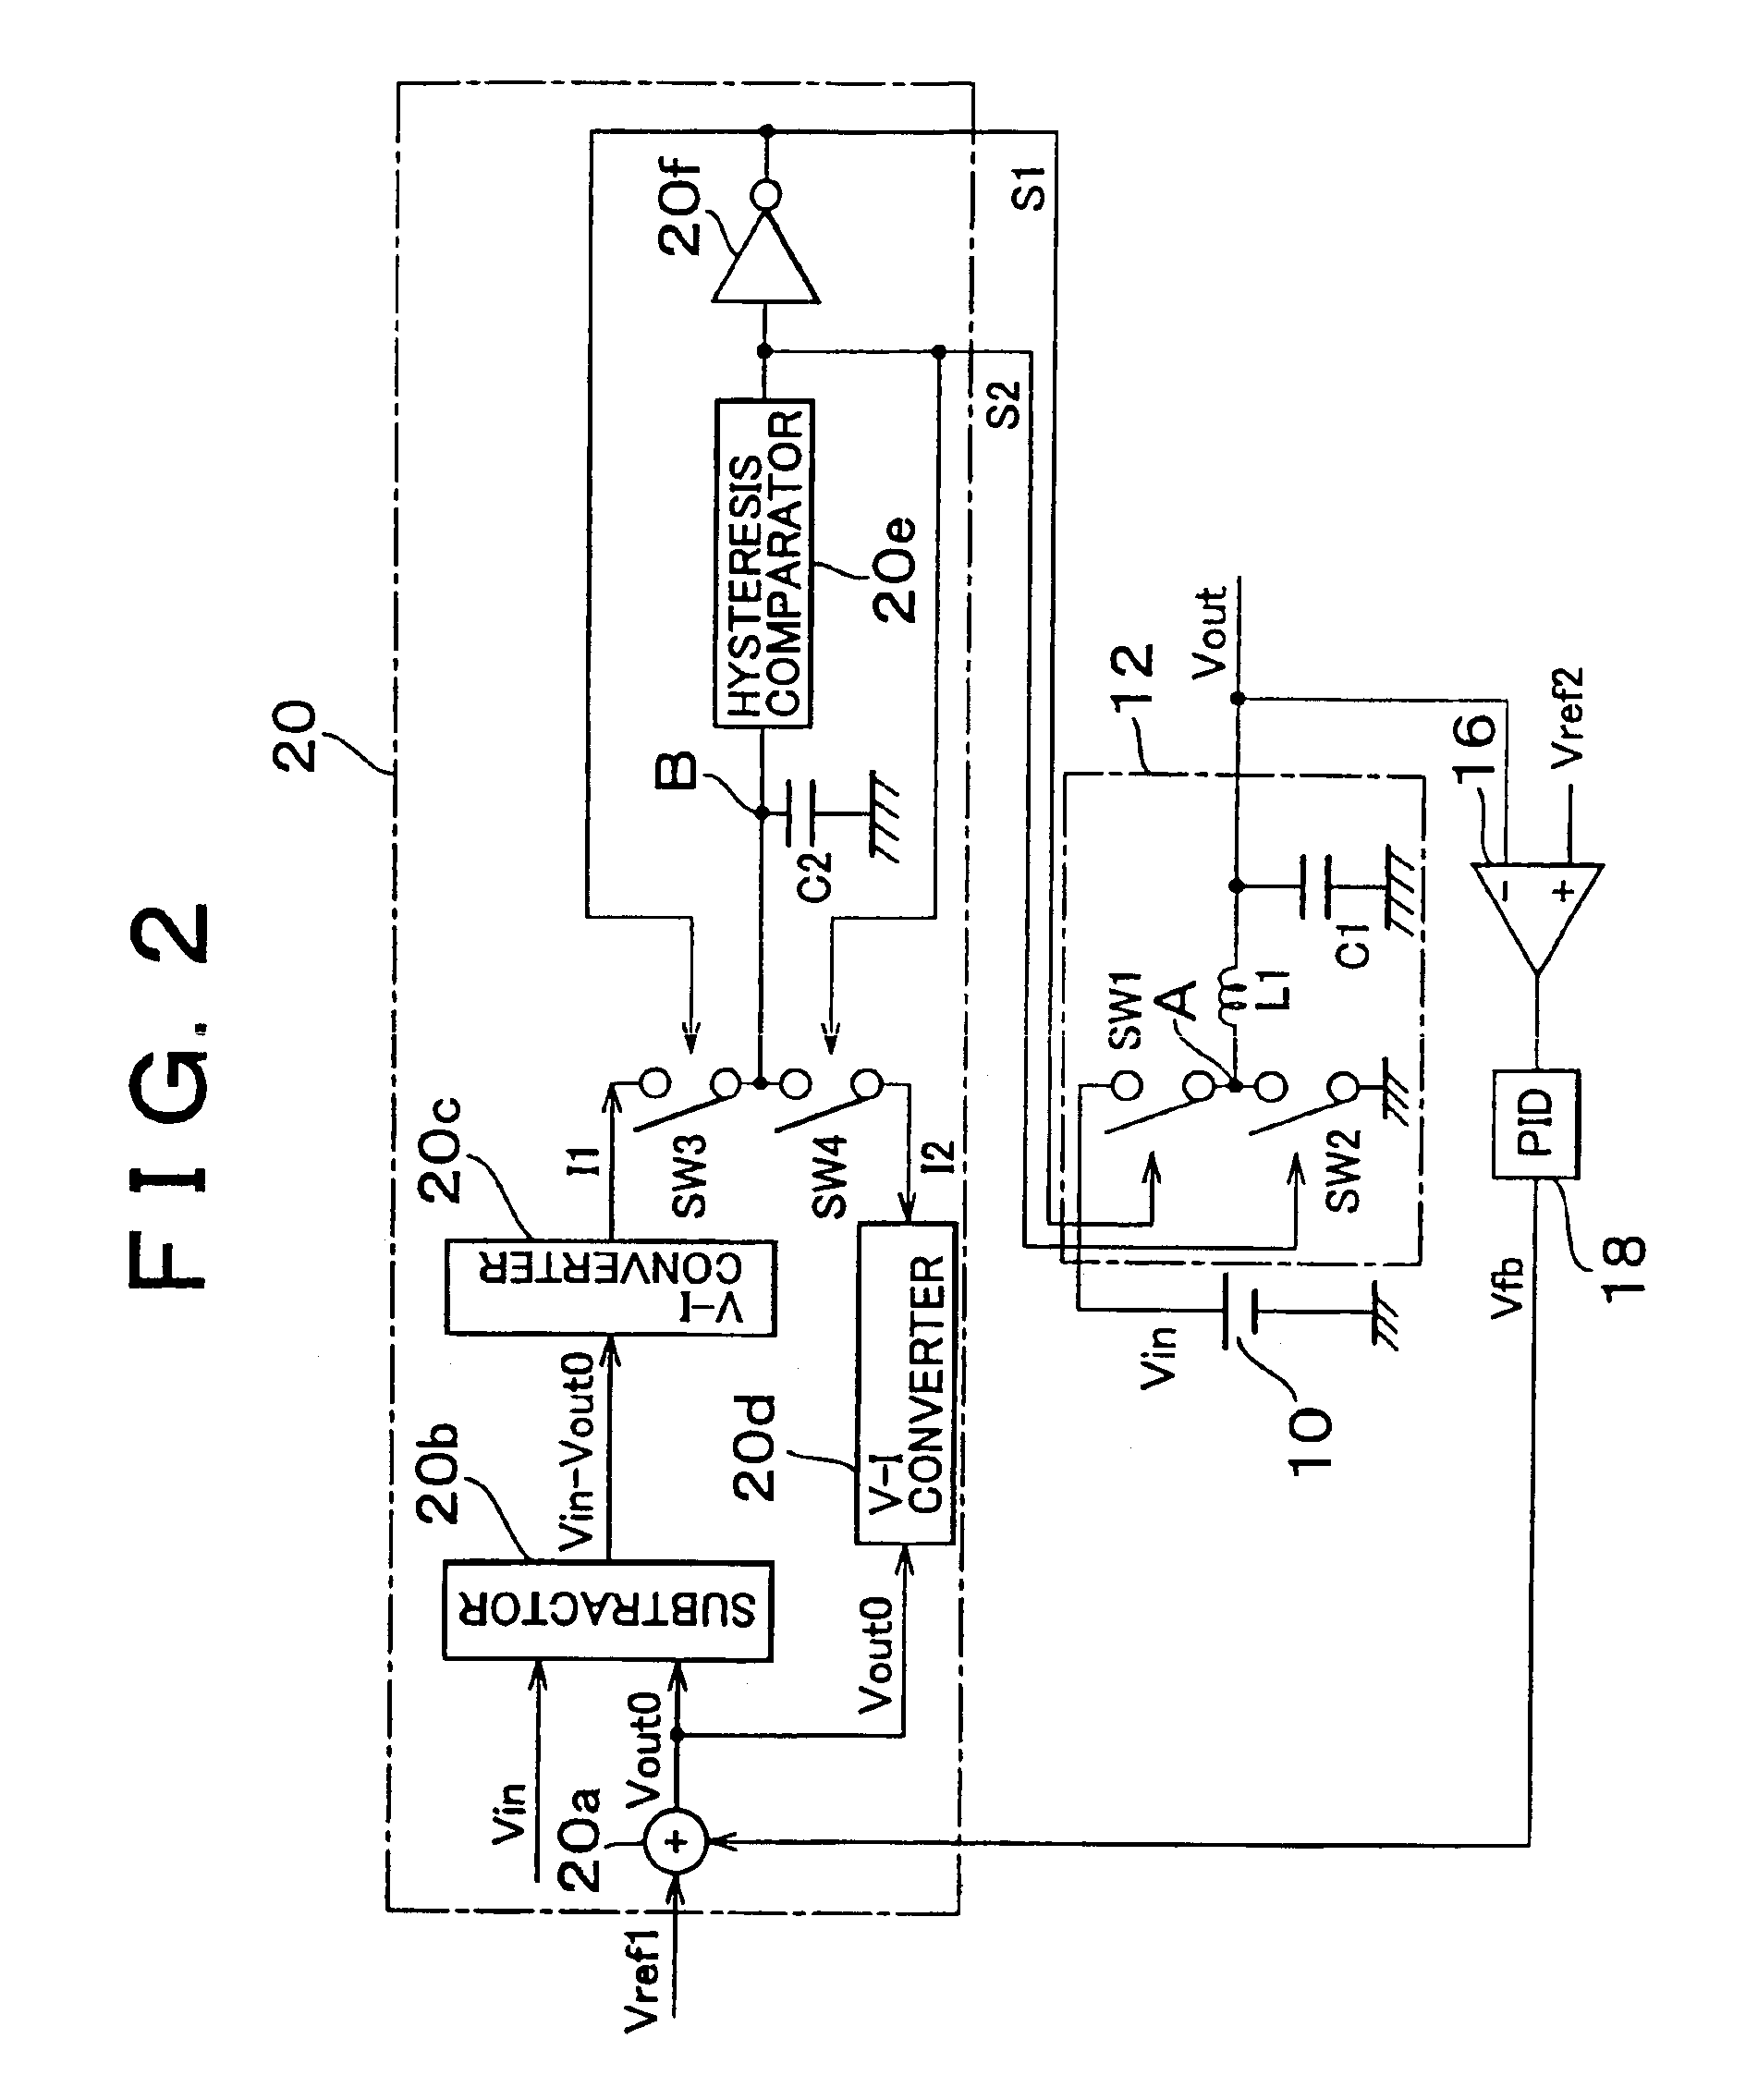 DC-DC converter with feed-forward and feedback control